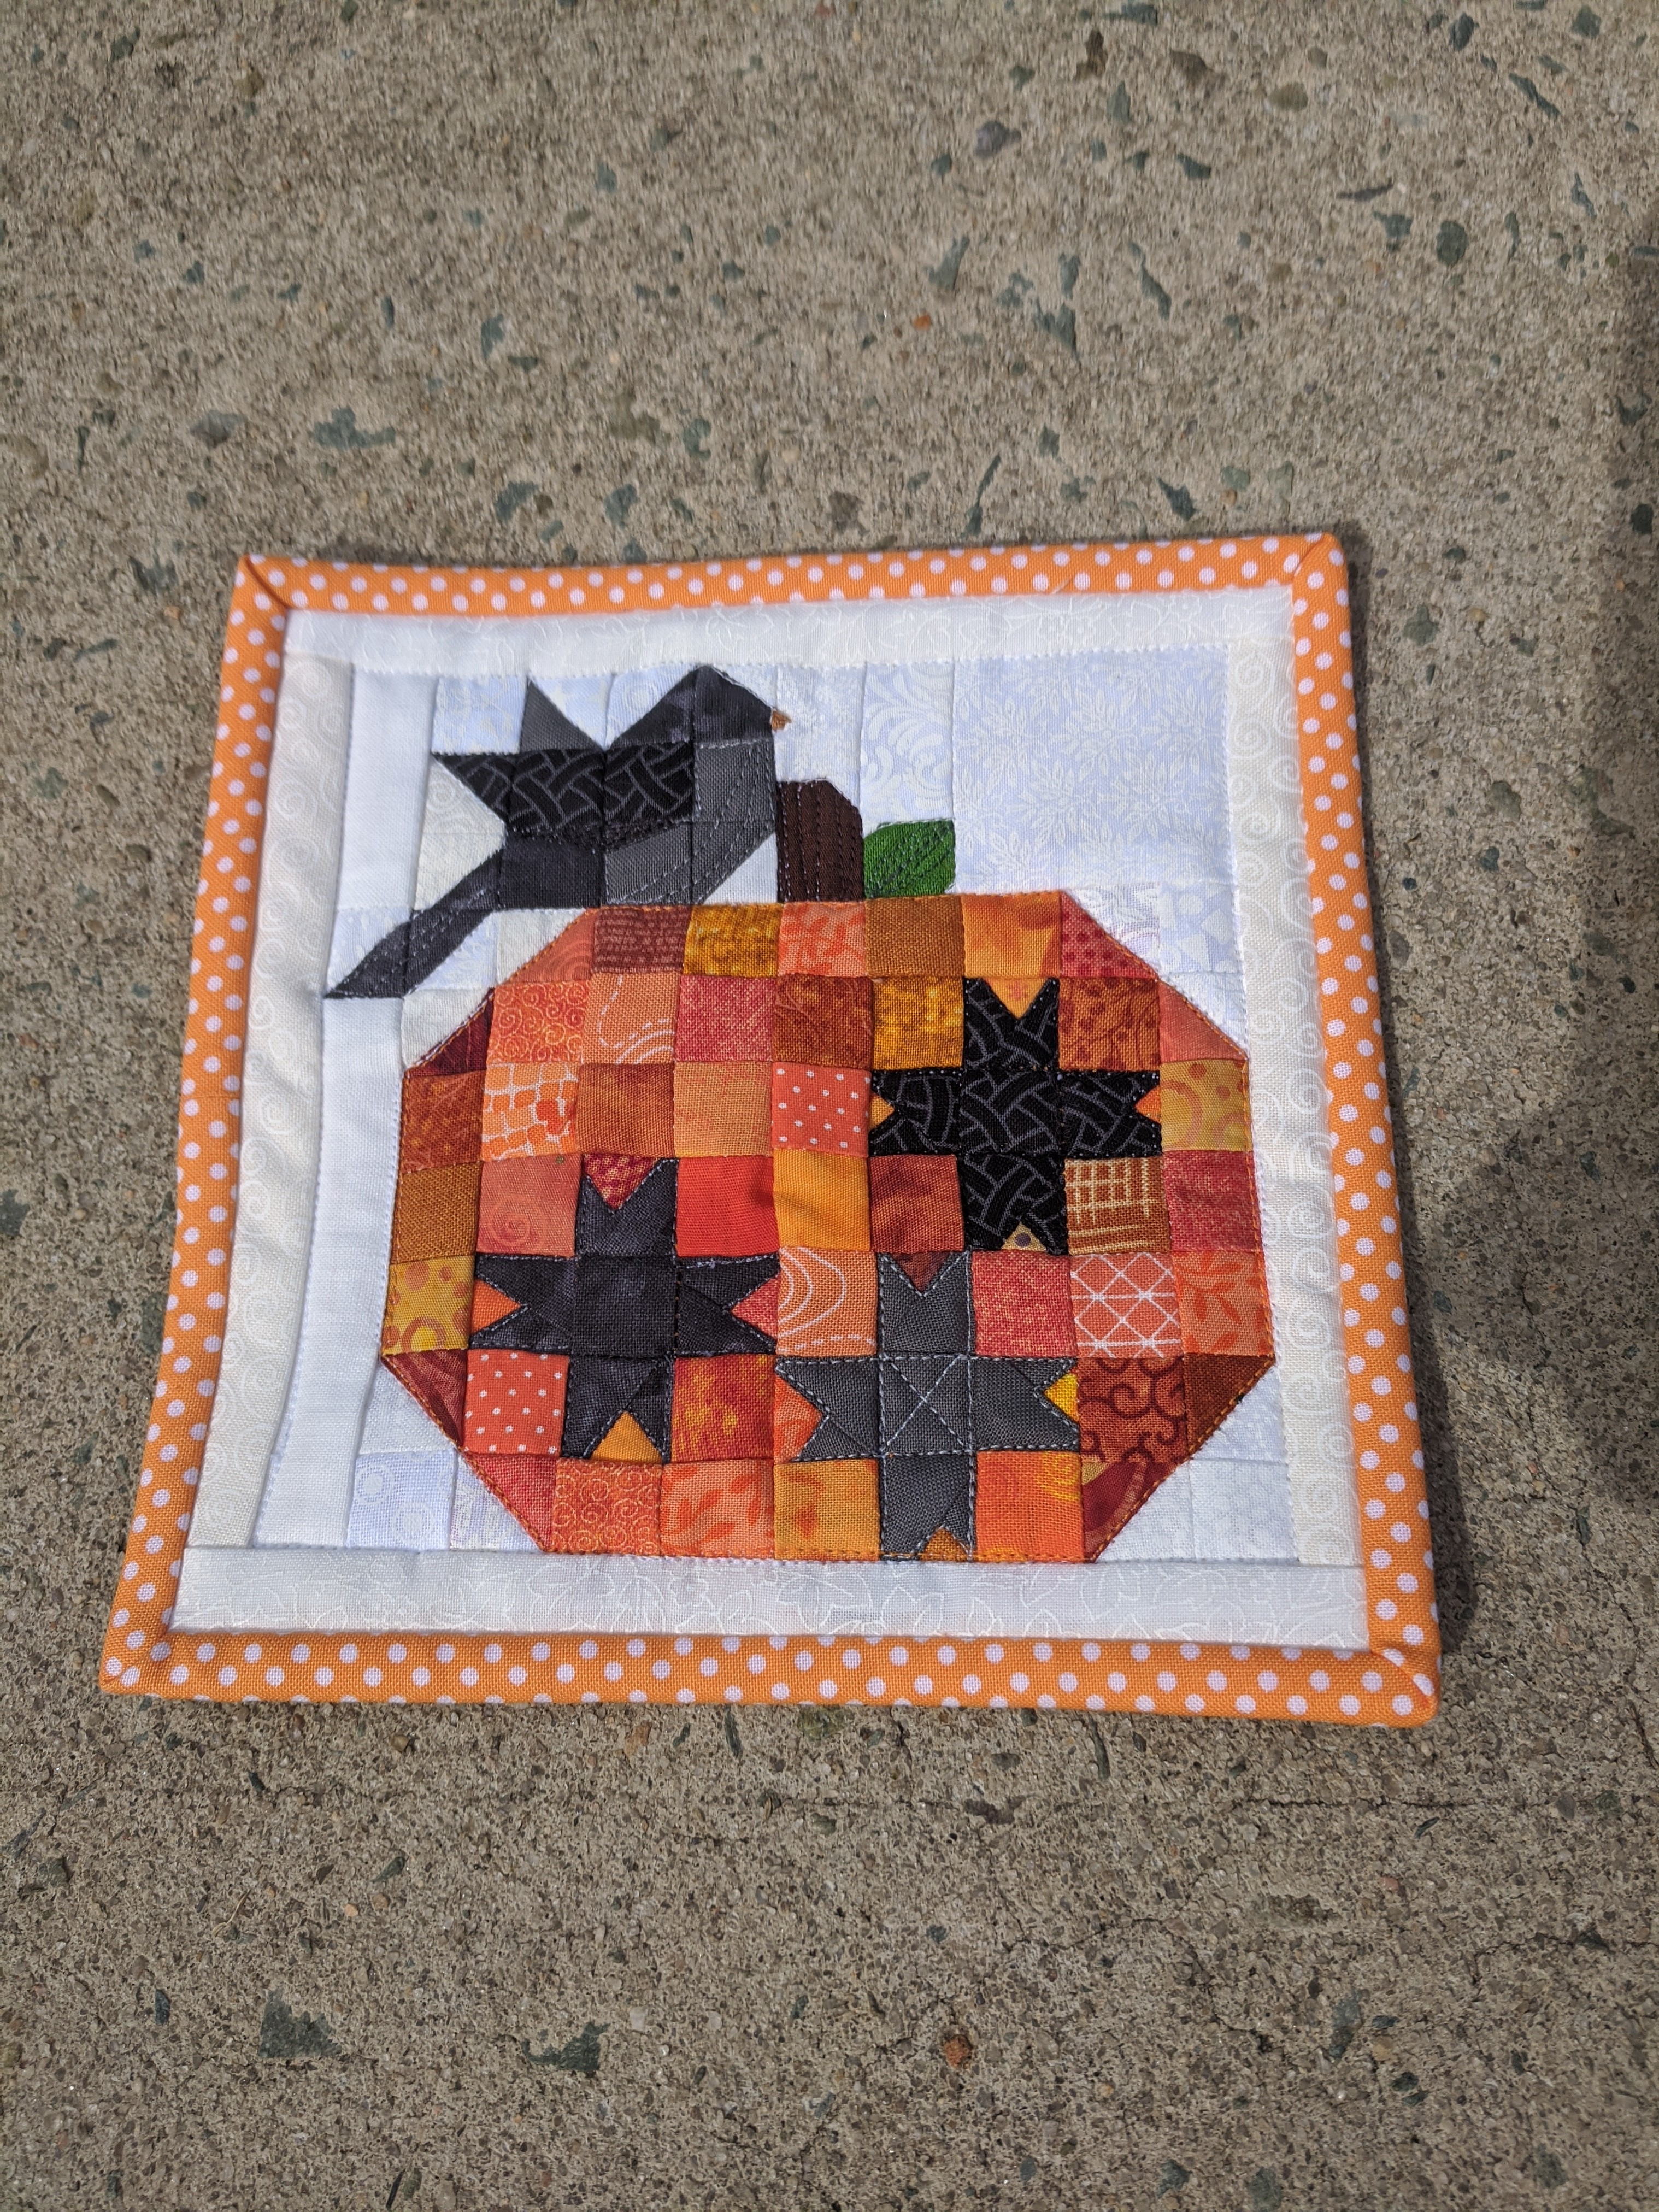 The Joyful Quilter: Hello Fall Blog Hop - My STOP on the Hop